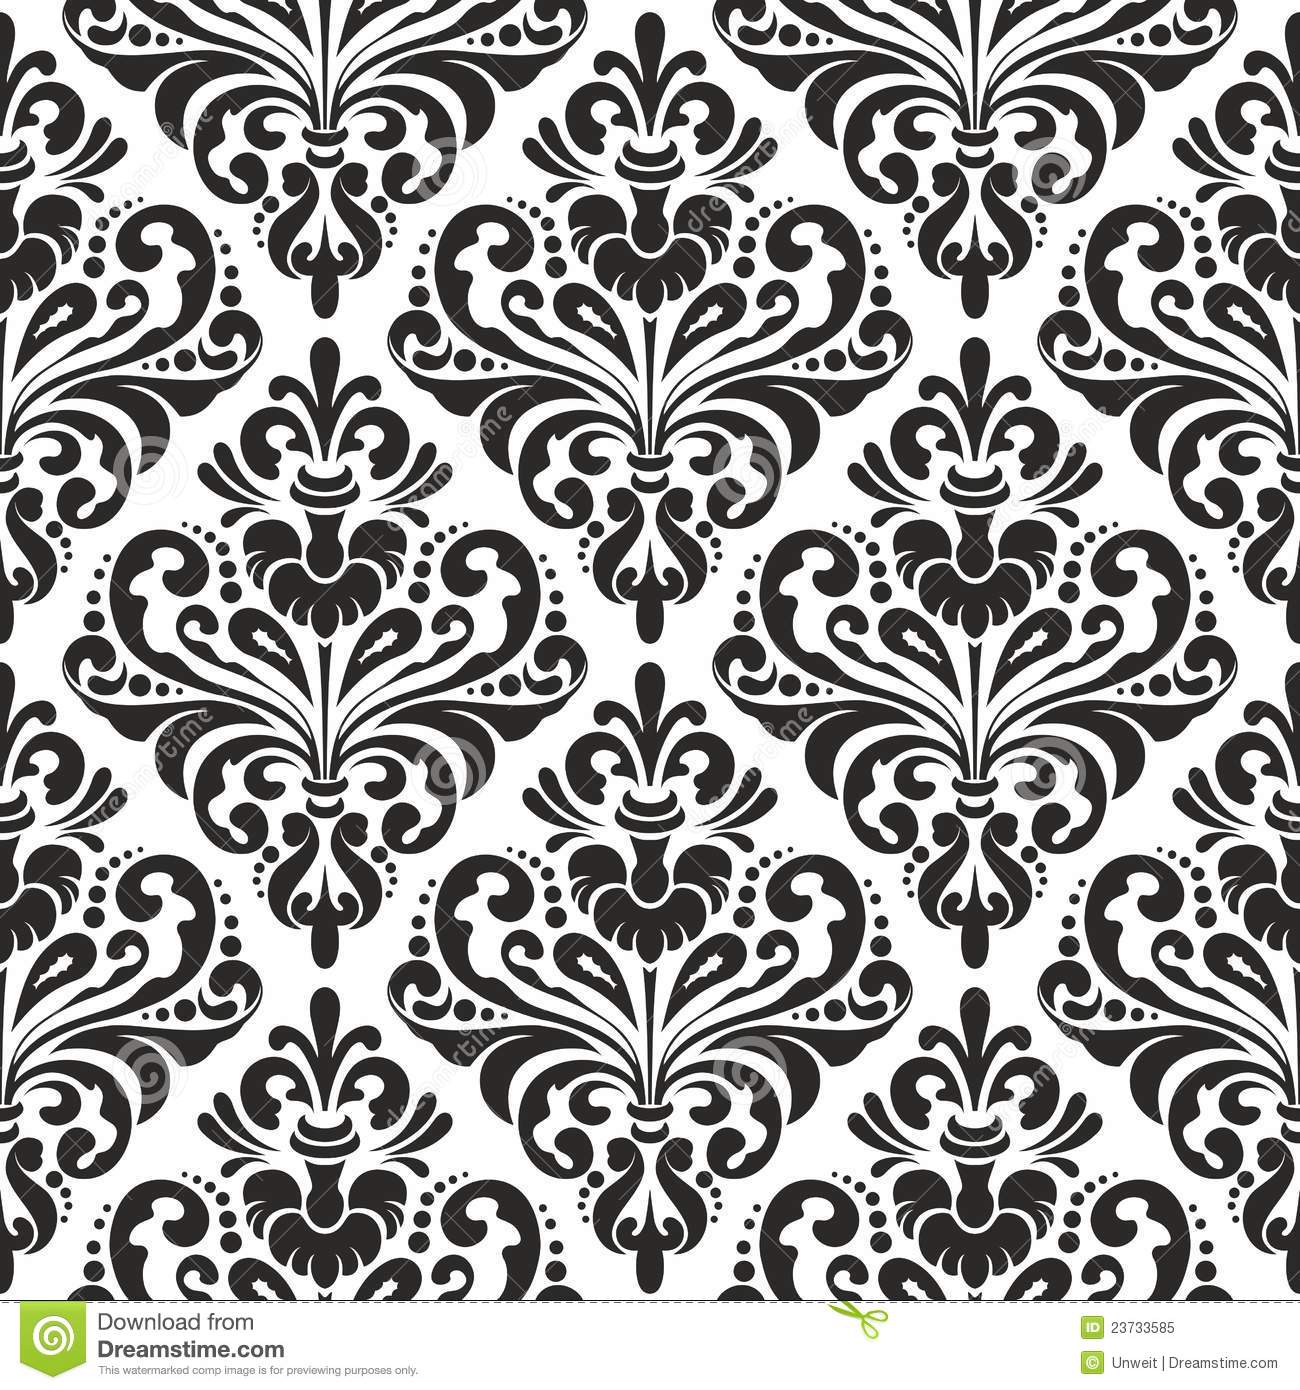 Black White Damask Wallpaper Release date Specs Review Redesign